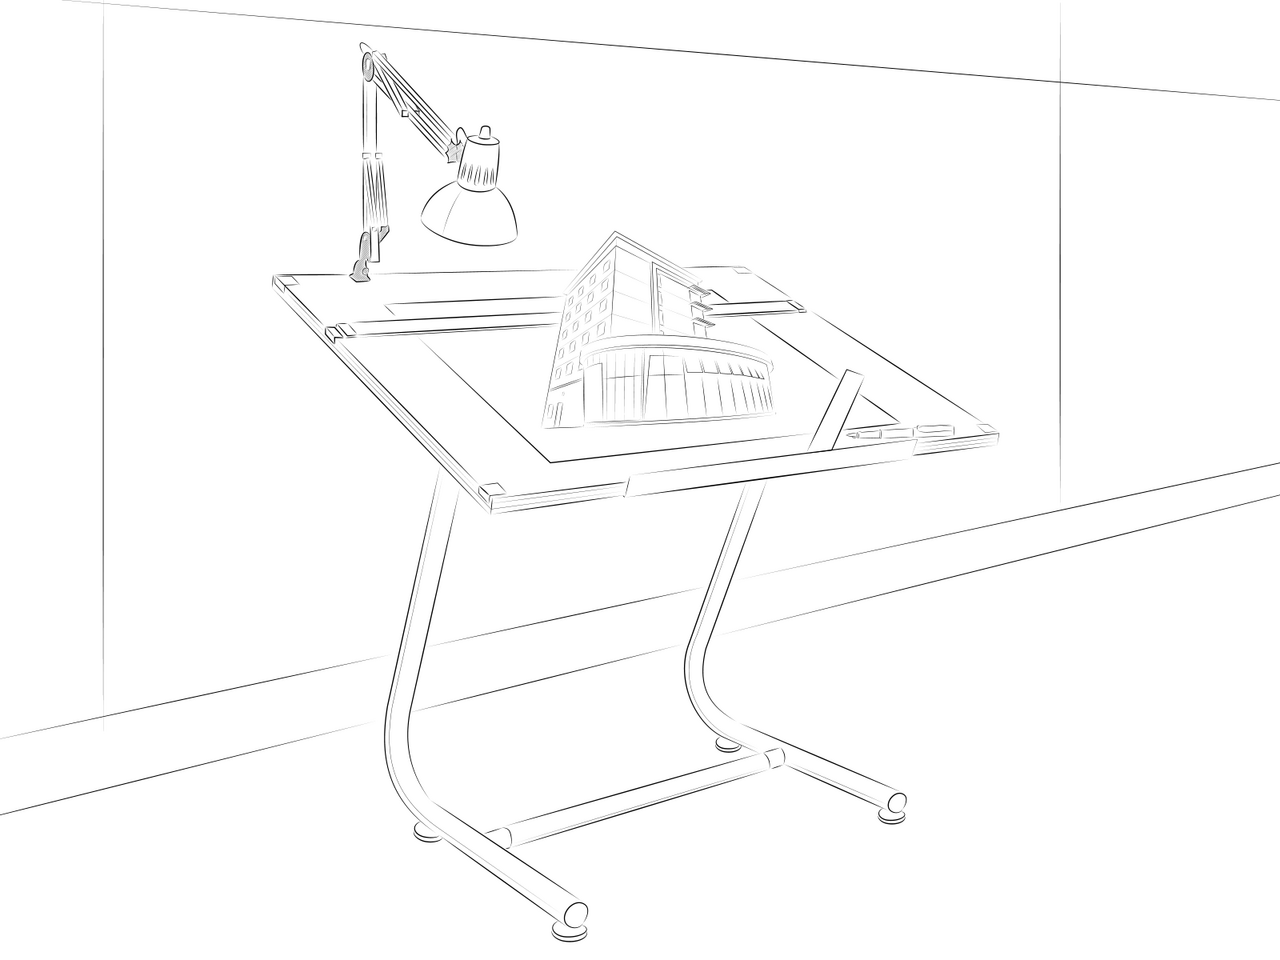 A draughting table with a building growing from the paper